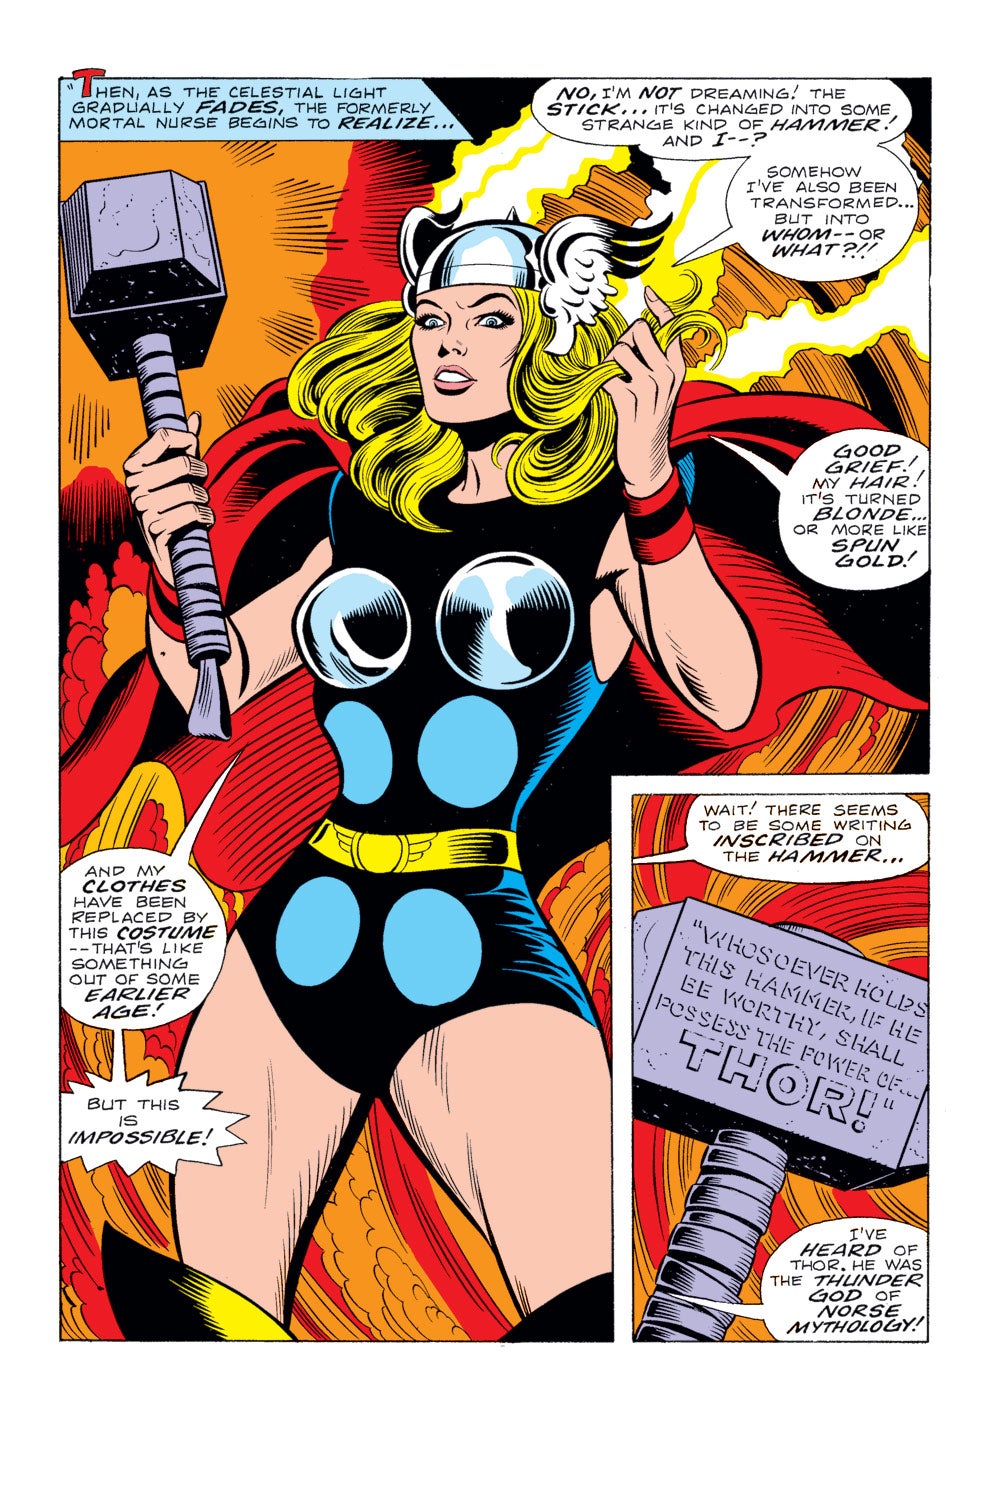 Interior page of What If, featuring Jane Foster in a Thor costume, holding Mjolnir